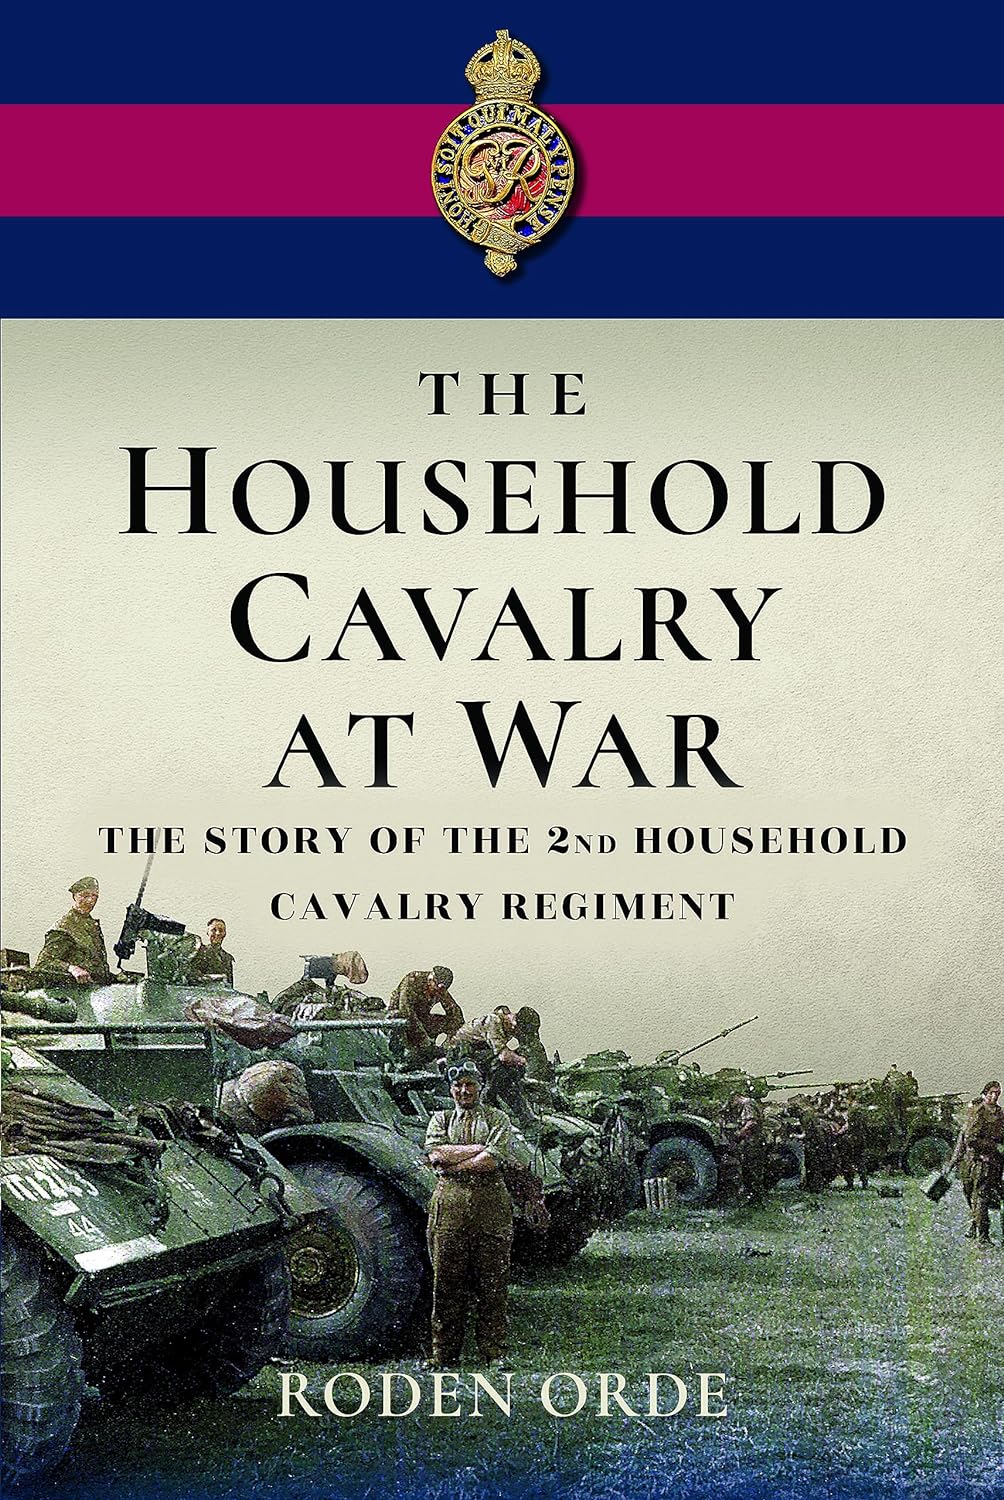 The Household Cavalry at War